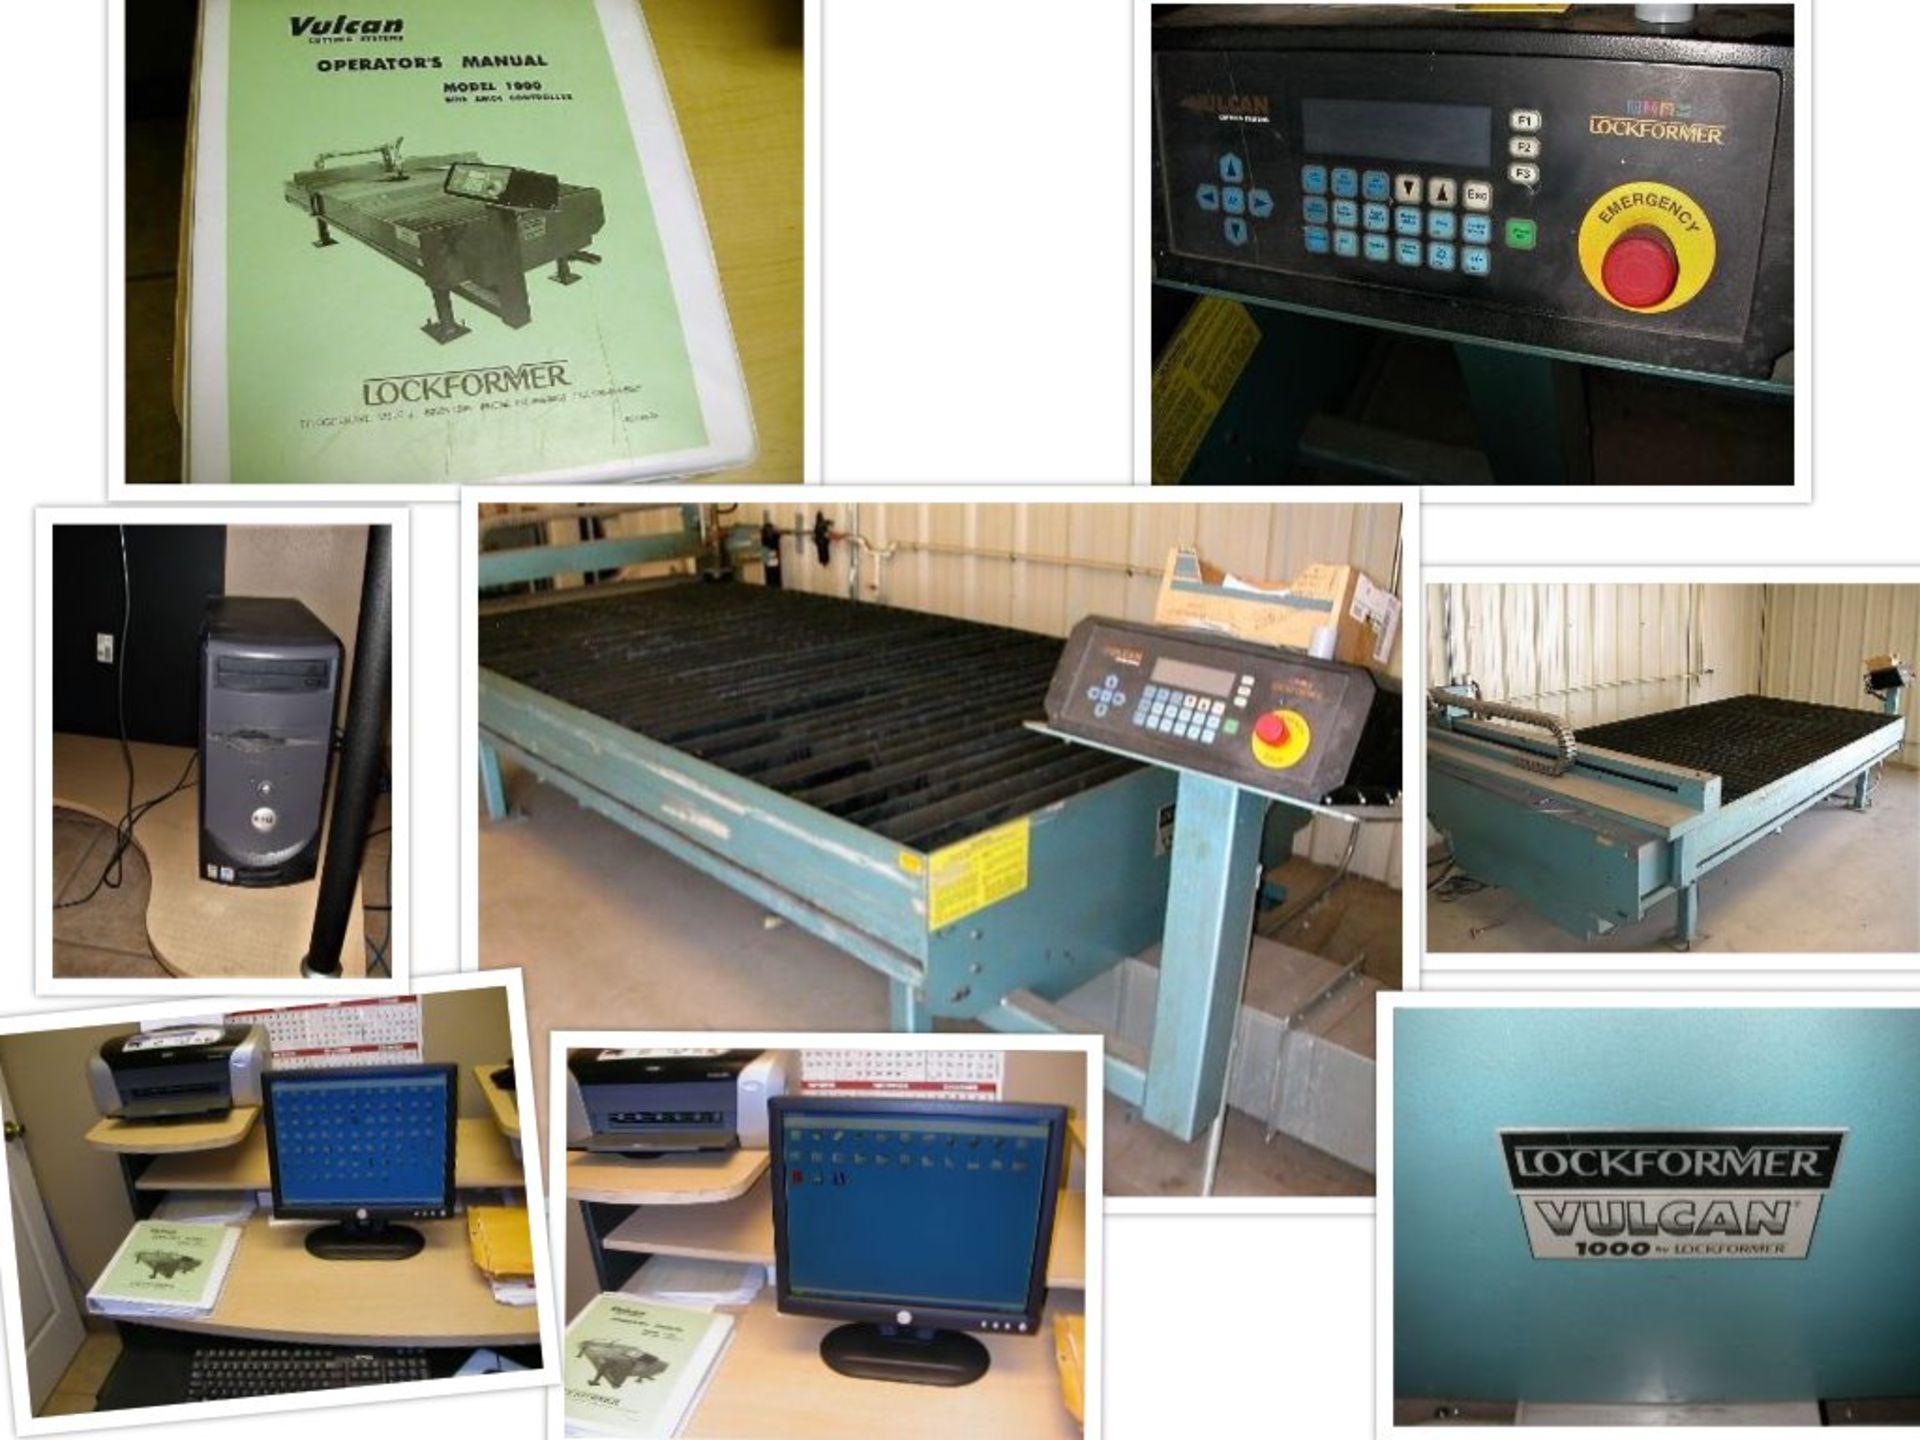 Lockformer Vulcan 1000 Cutting Systems with AMC4 Controller. Computerized 10'x5' Sheet Metal Table